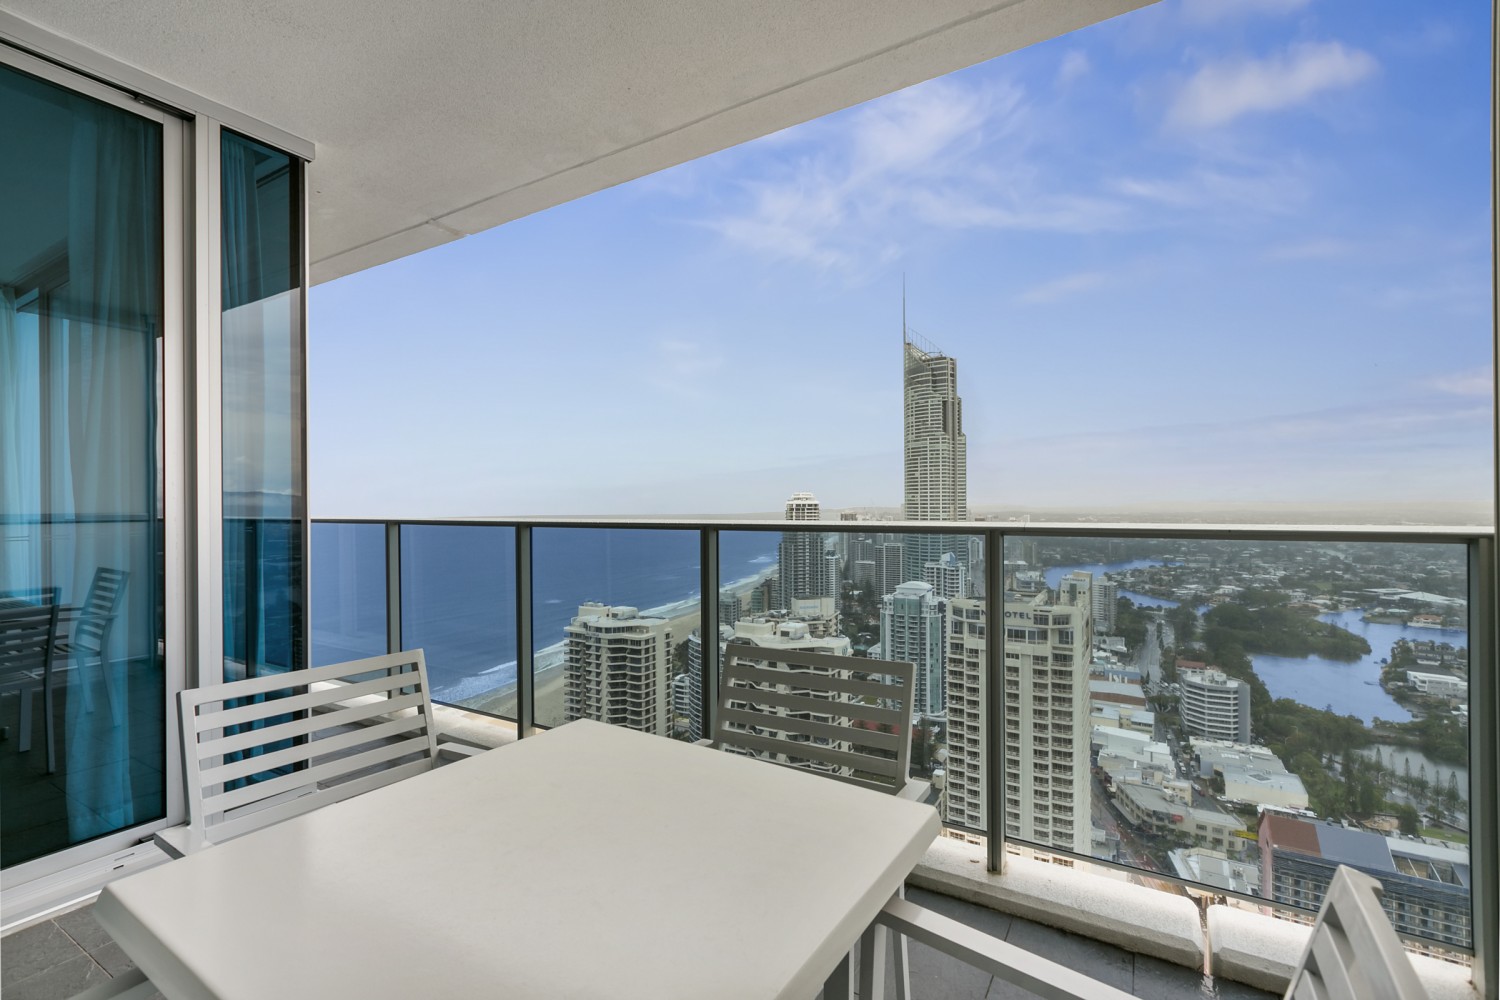 South East views of Surfers Paradise